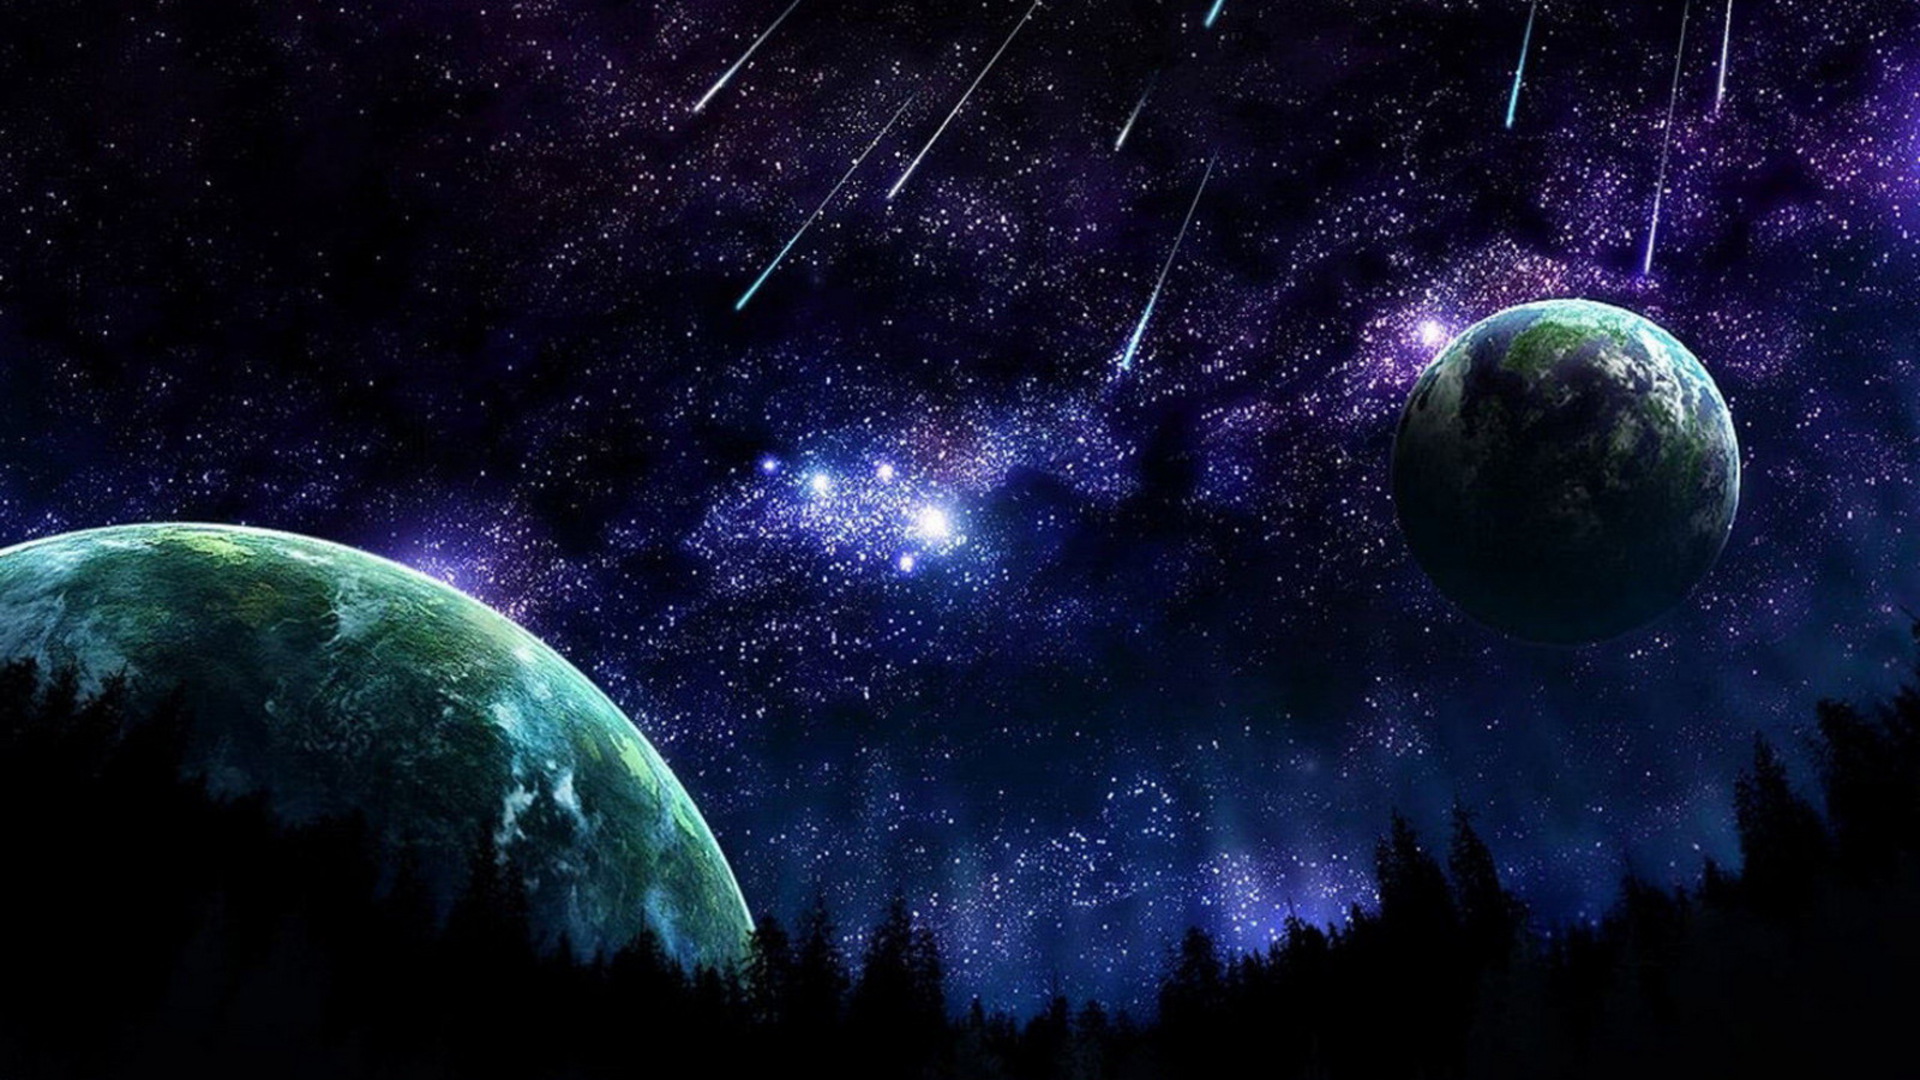 Outer Space Puter Background HD Wallpaper